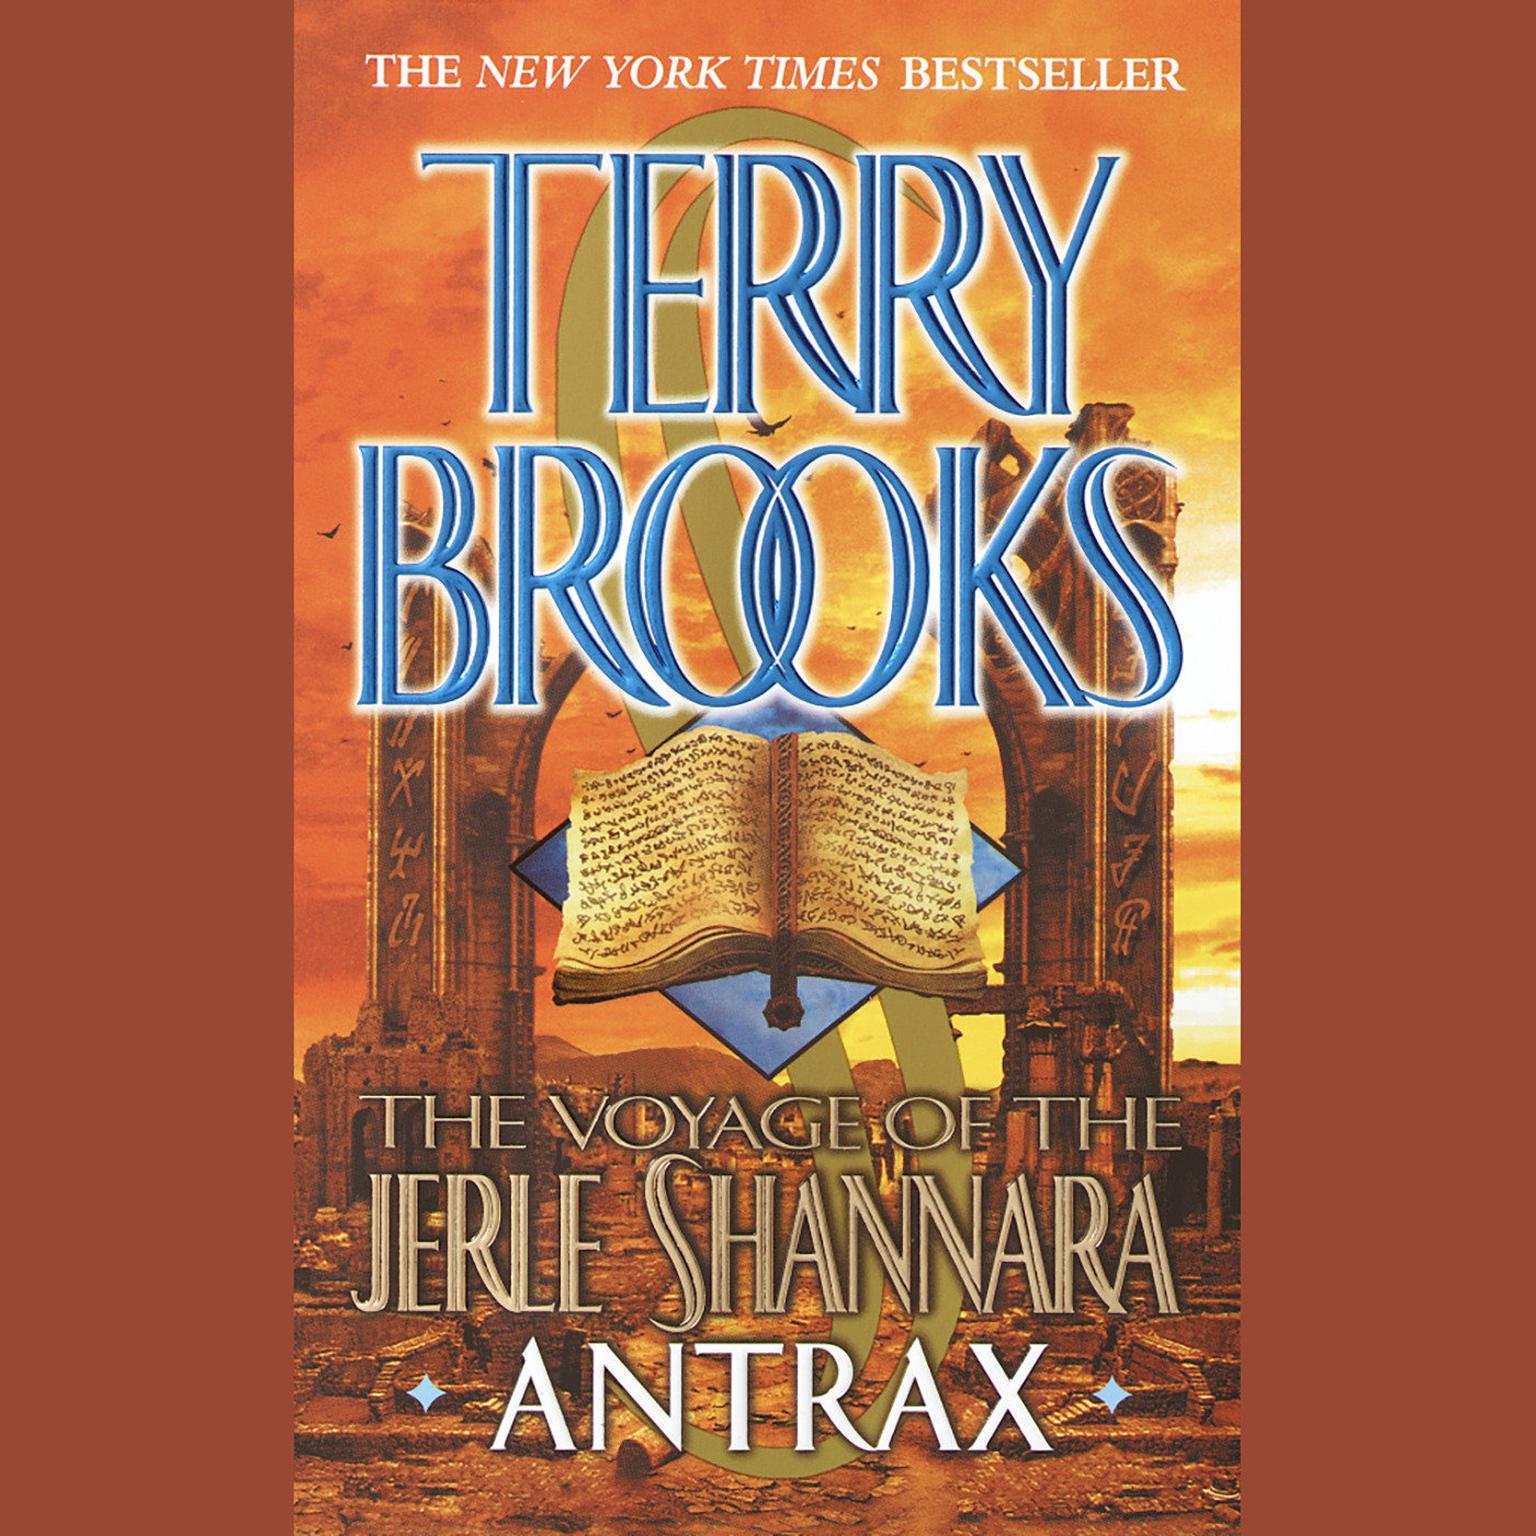 The Voyage of the Jerle Shannara: Antrax Audiobook, by Terry Brooks